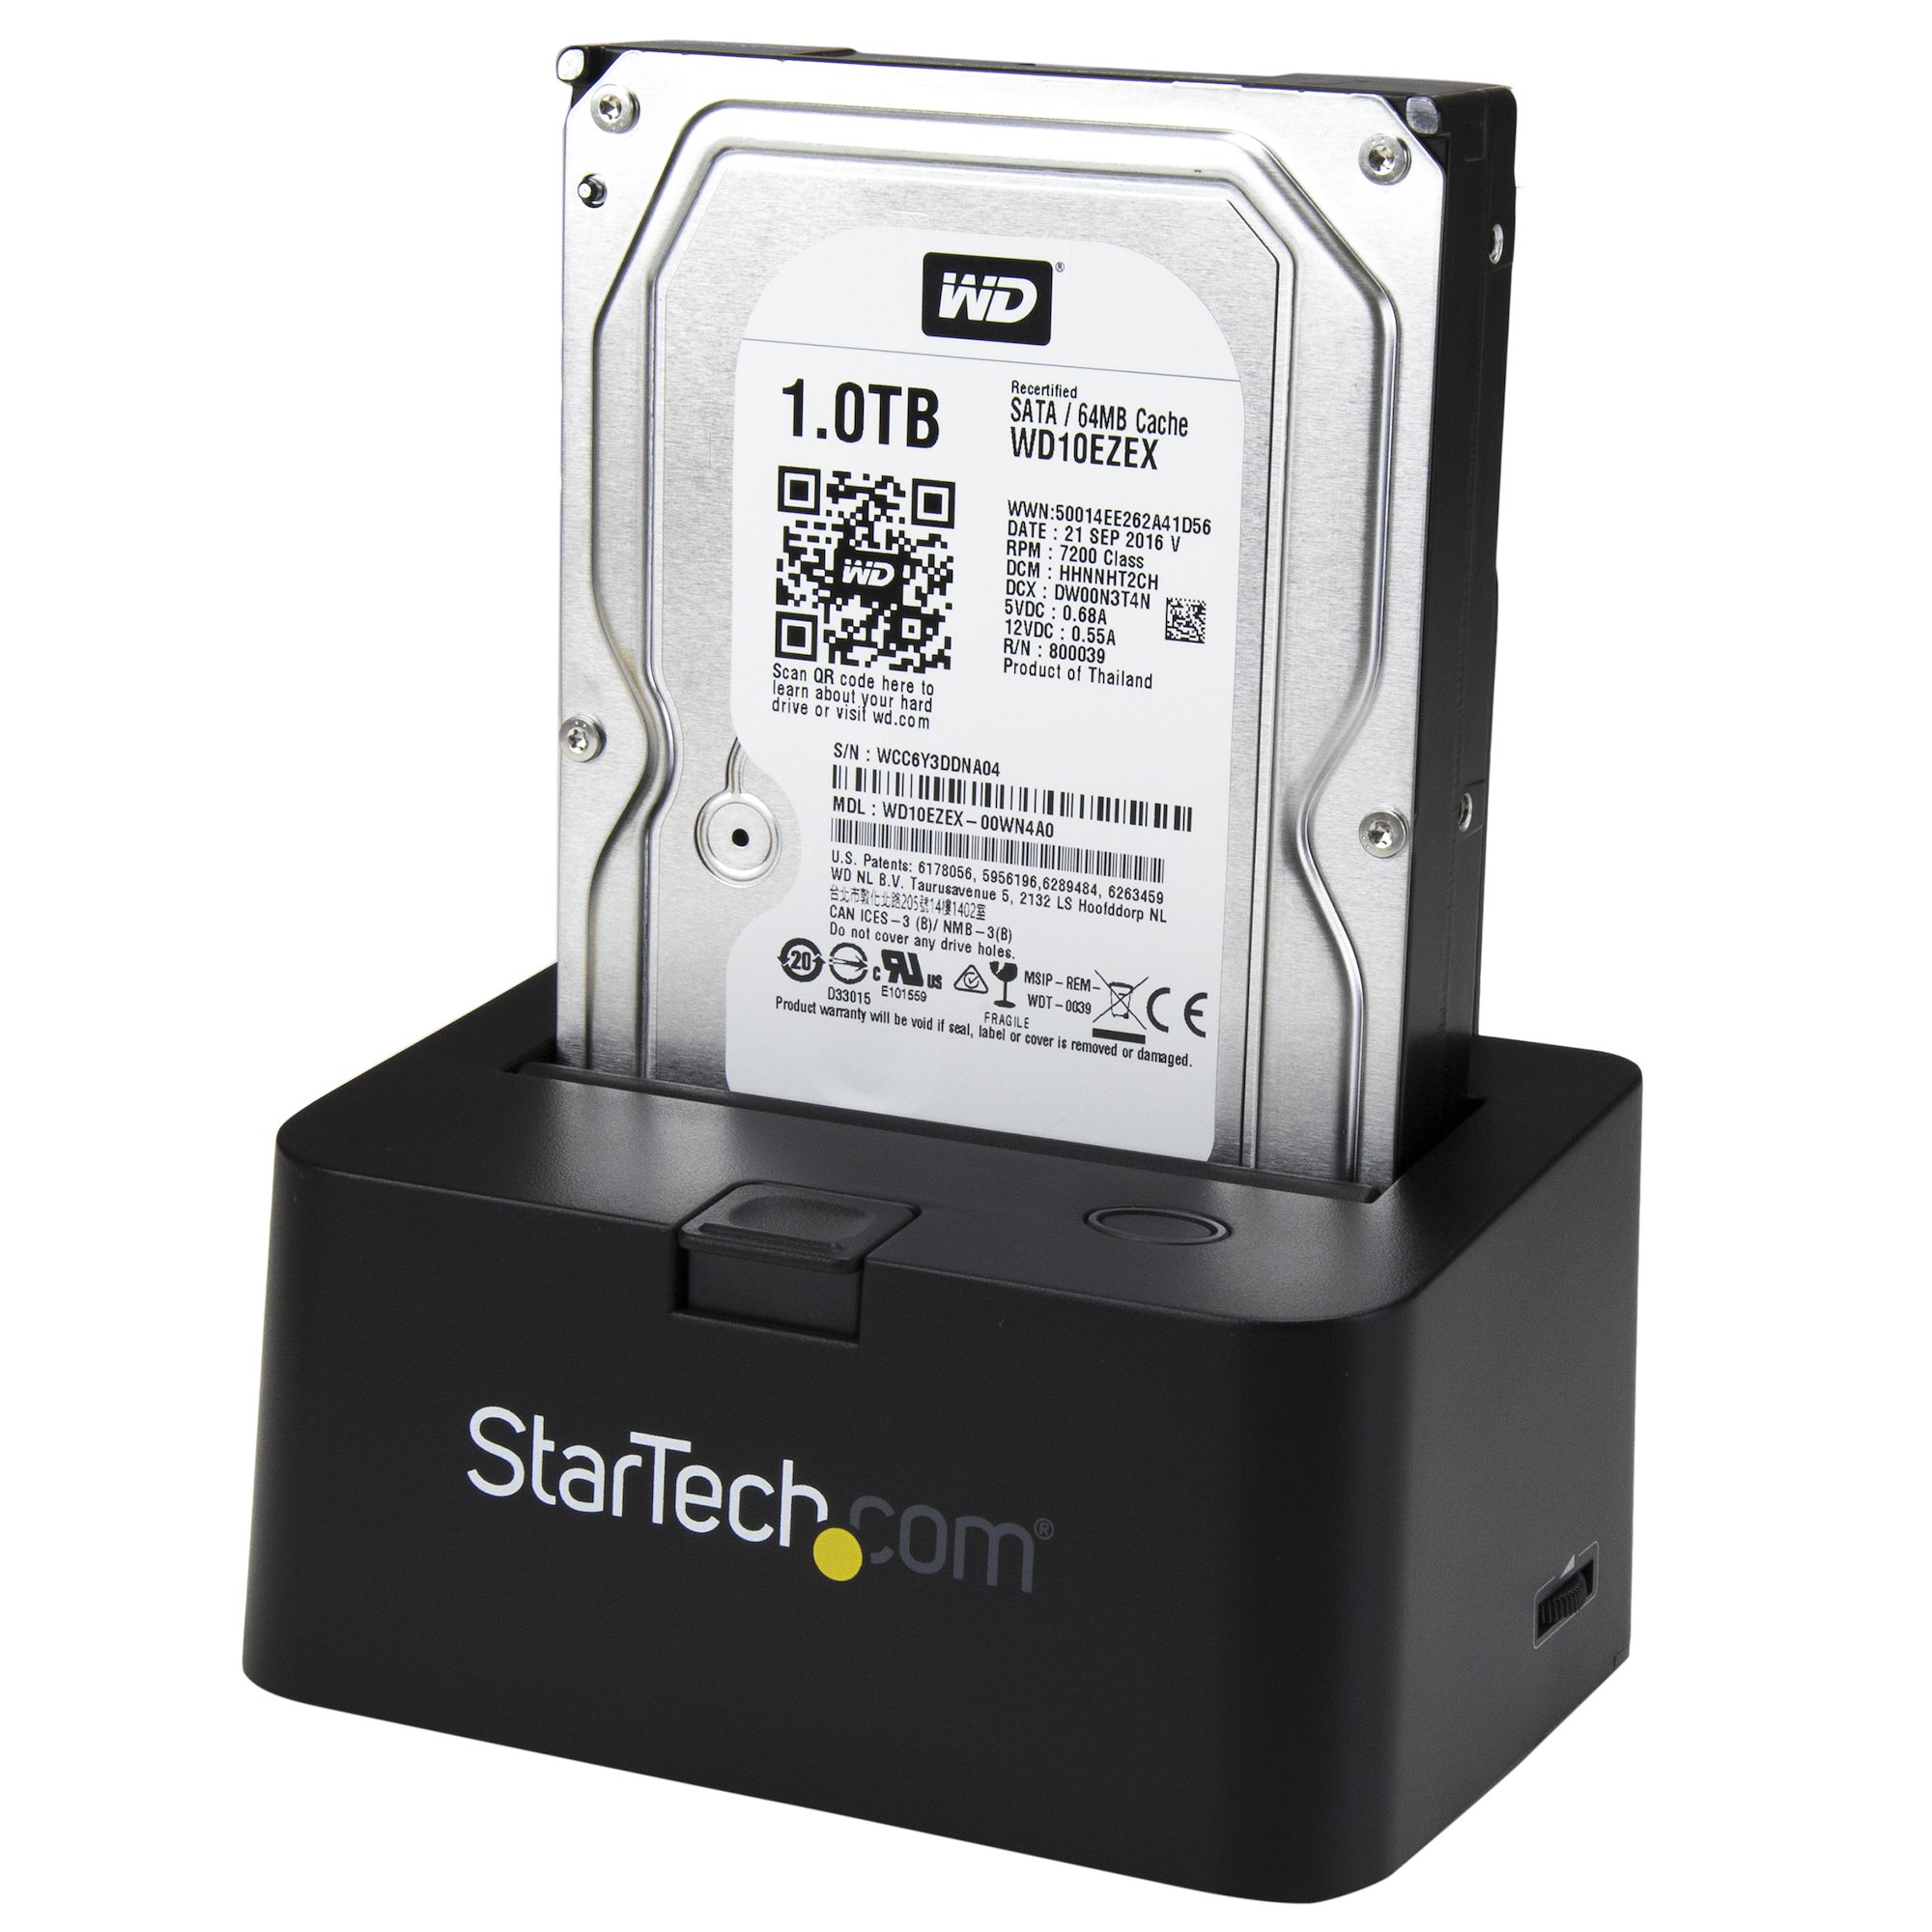 StarTech.com Universal Hard Drive Docking Station for SATA and IDE - USB  3.0 Dock for 2.5/3.5 HDDs/SSDs with UASP (UNIDOCKU33) - storage  controller - ATA / SATA 6Gb/s - USB 3.0